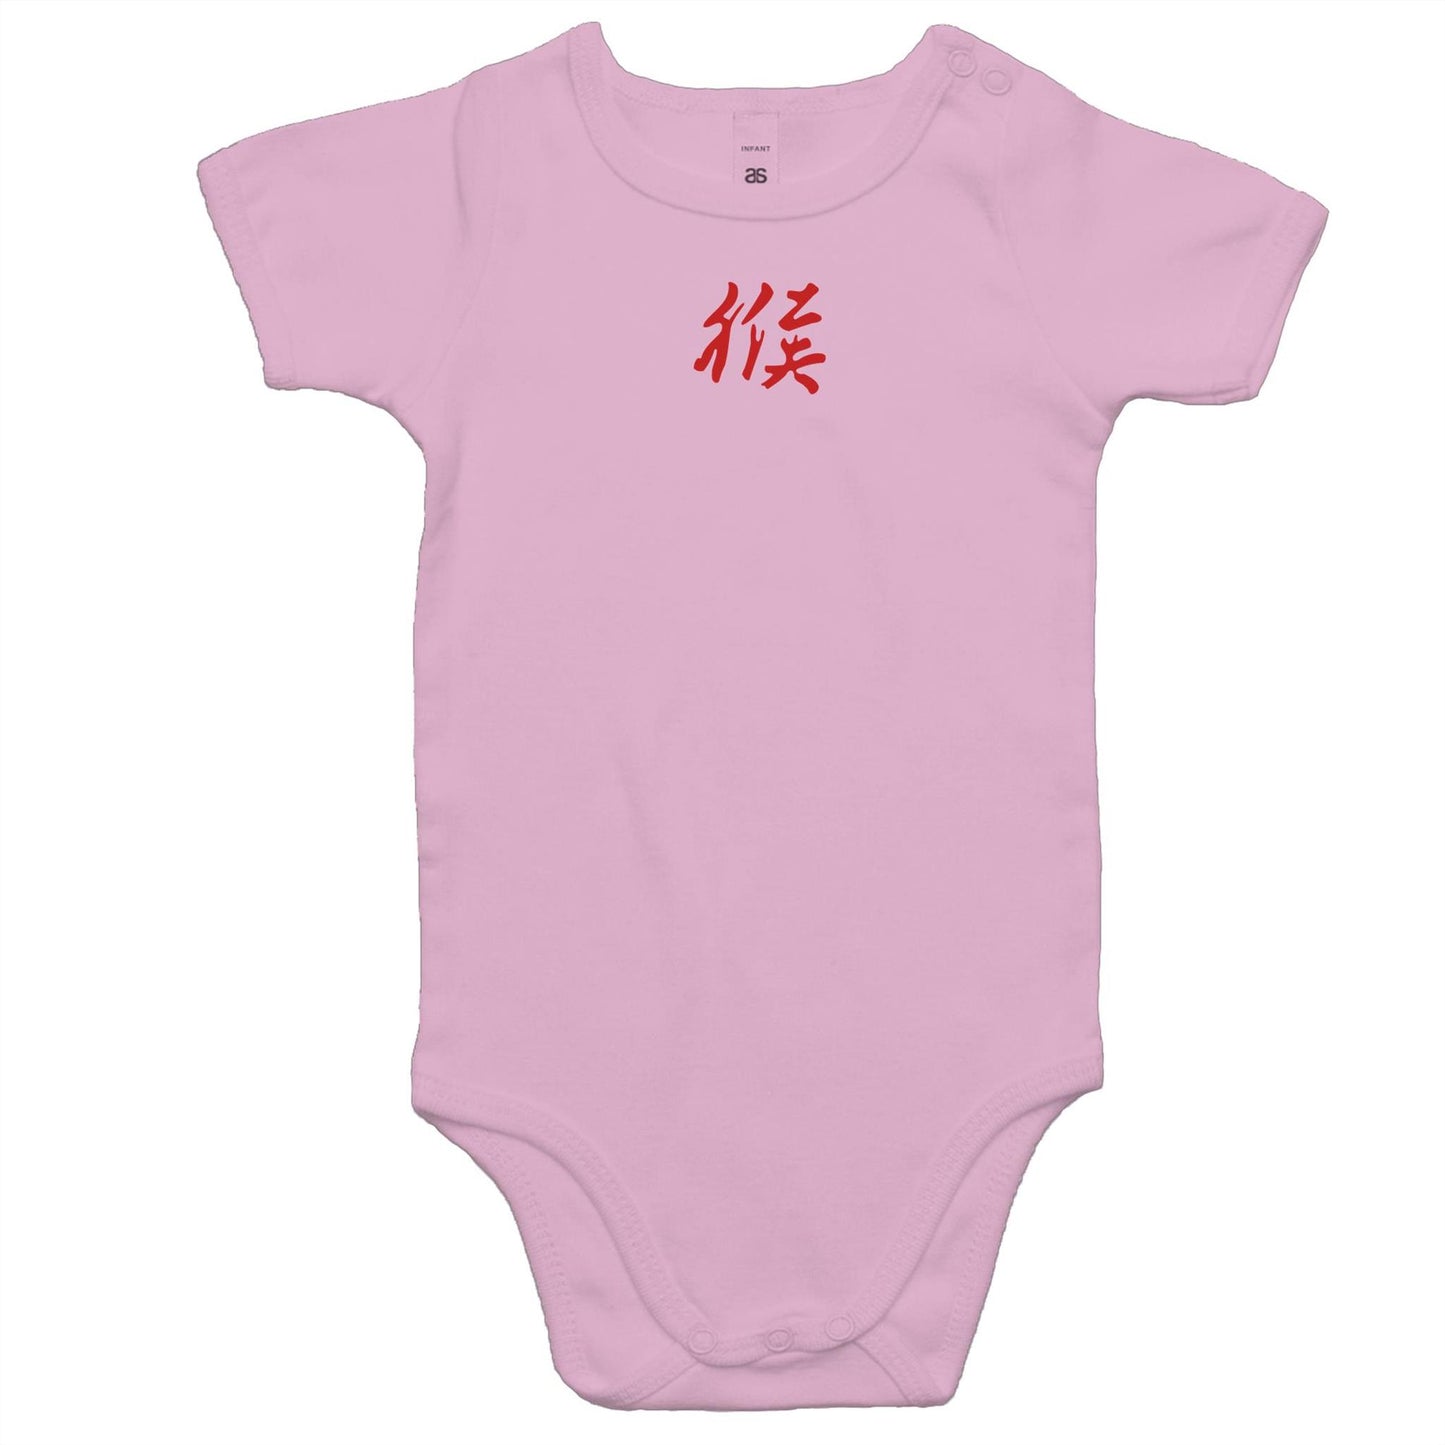 Year of the Monkey Rompers for Babies